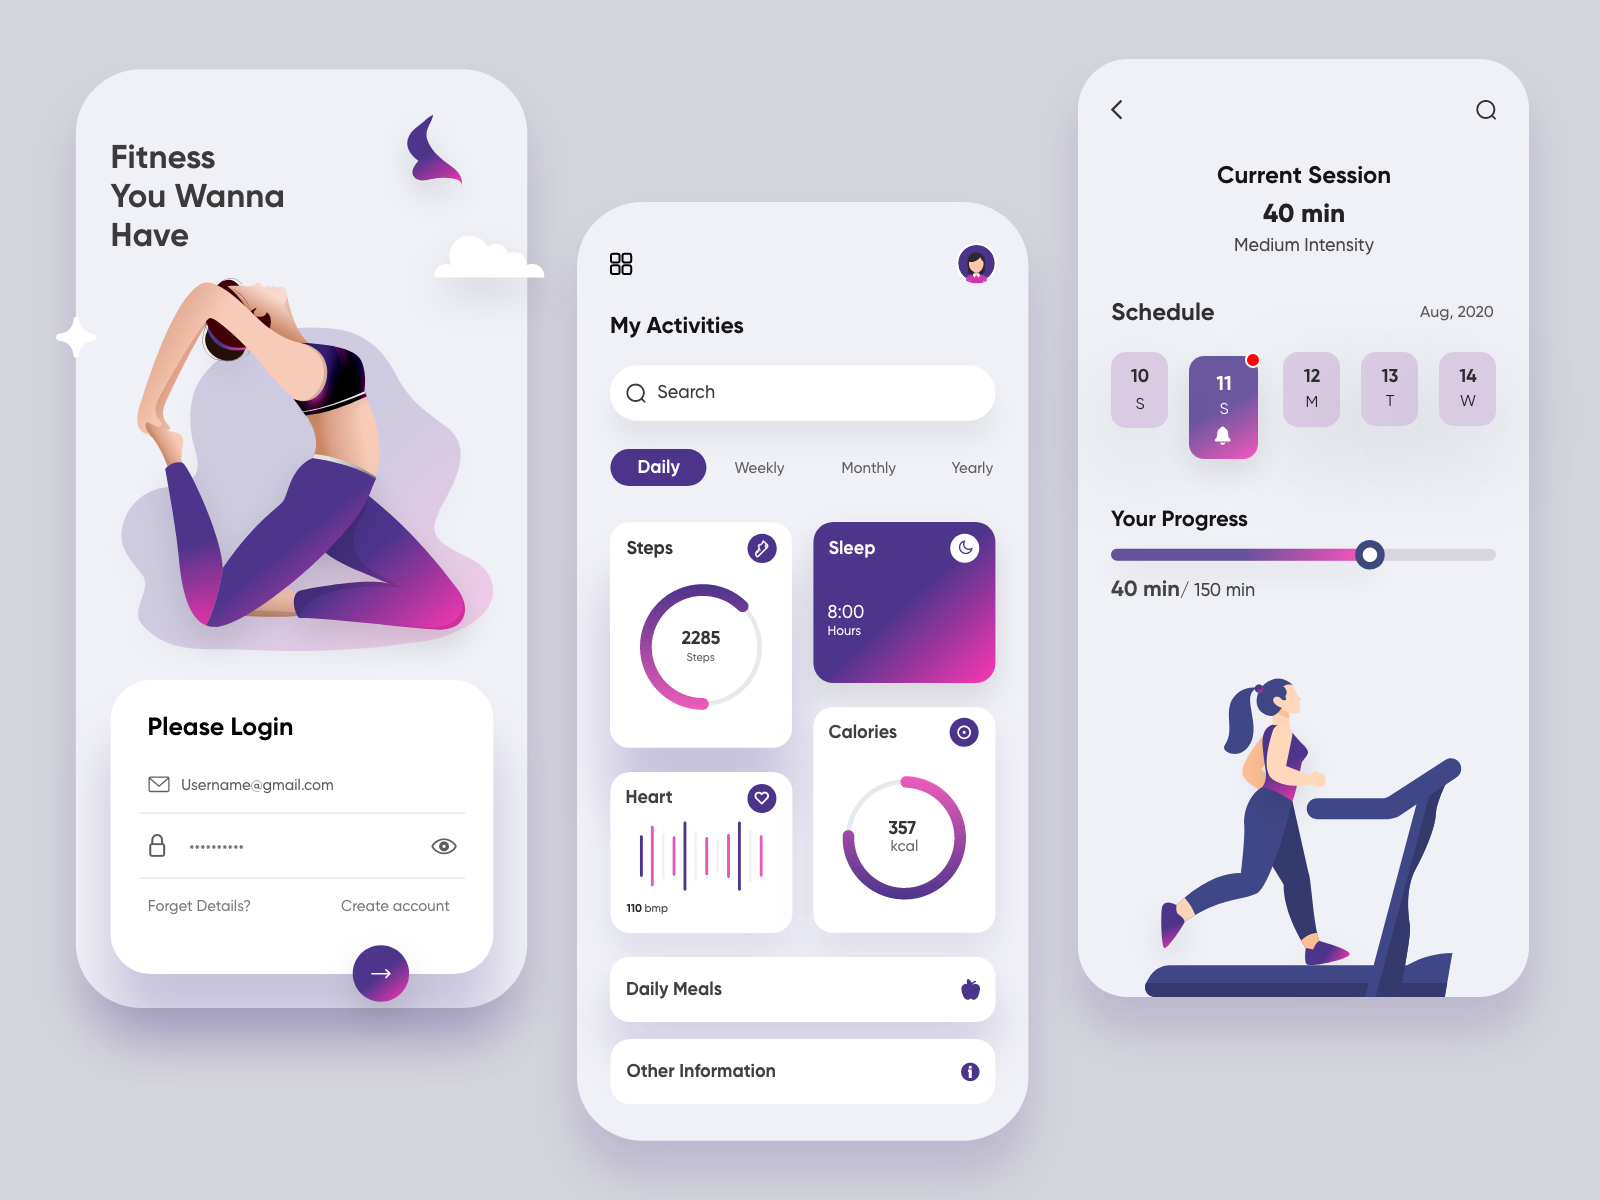 Fitness Mobile Application-UX/UI Design by Hira Riaz🌴 for Fireart